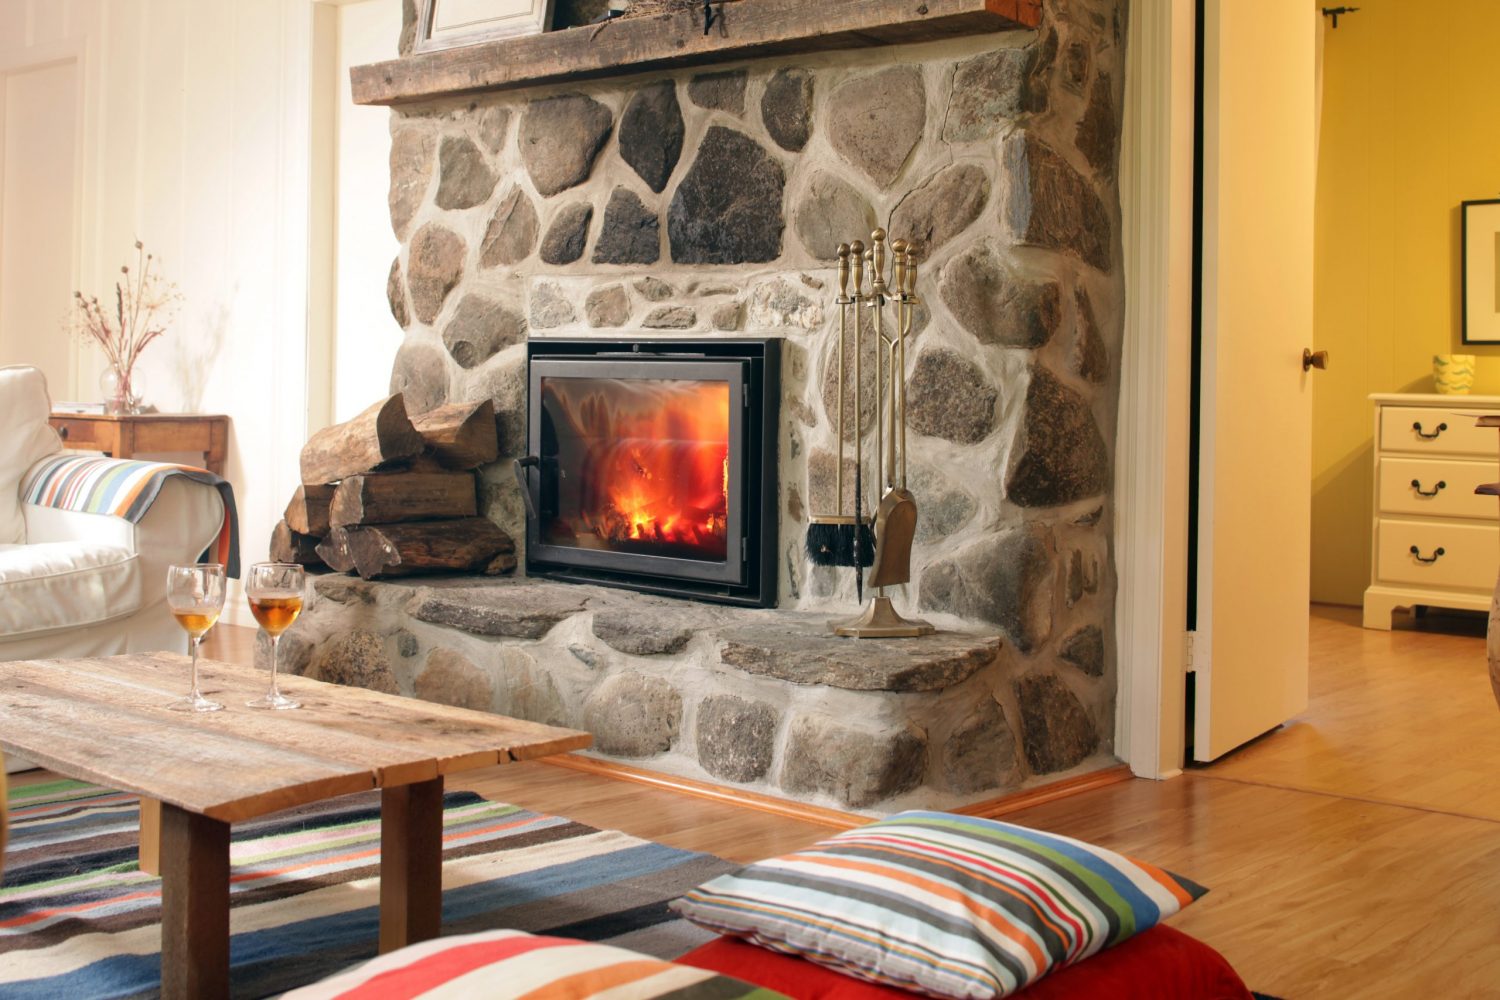 A large stone fireplace with a wide hearth and a roaring fire faces a living room with a white couch, a wooden coffee table and colourful, striped textiles such as a rug, cushions, and a throw over the couch's arm.